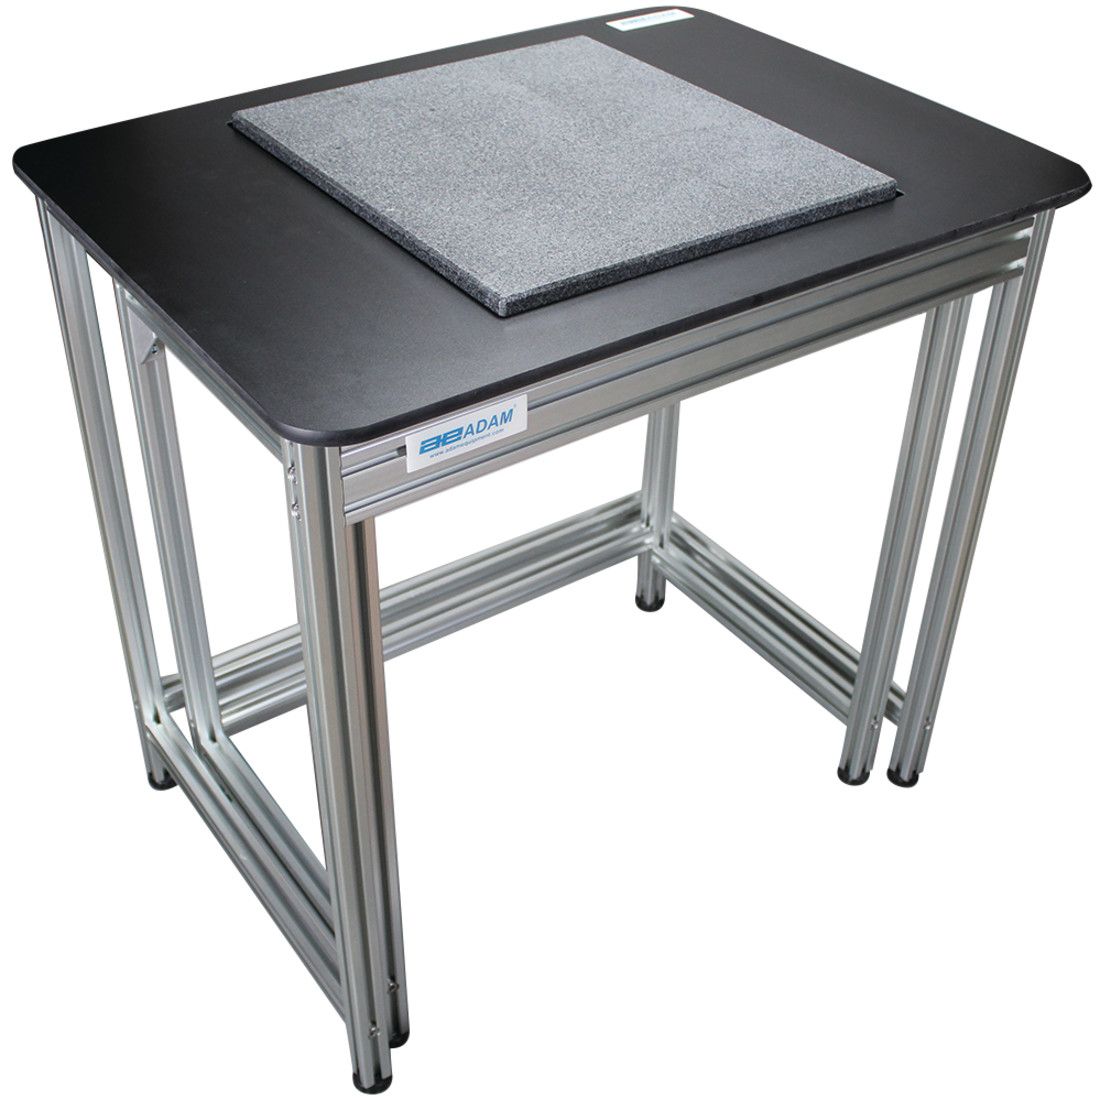 Anti-Vibration Table - Two-table construction keeps the granite block in the middle and reduces interference.